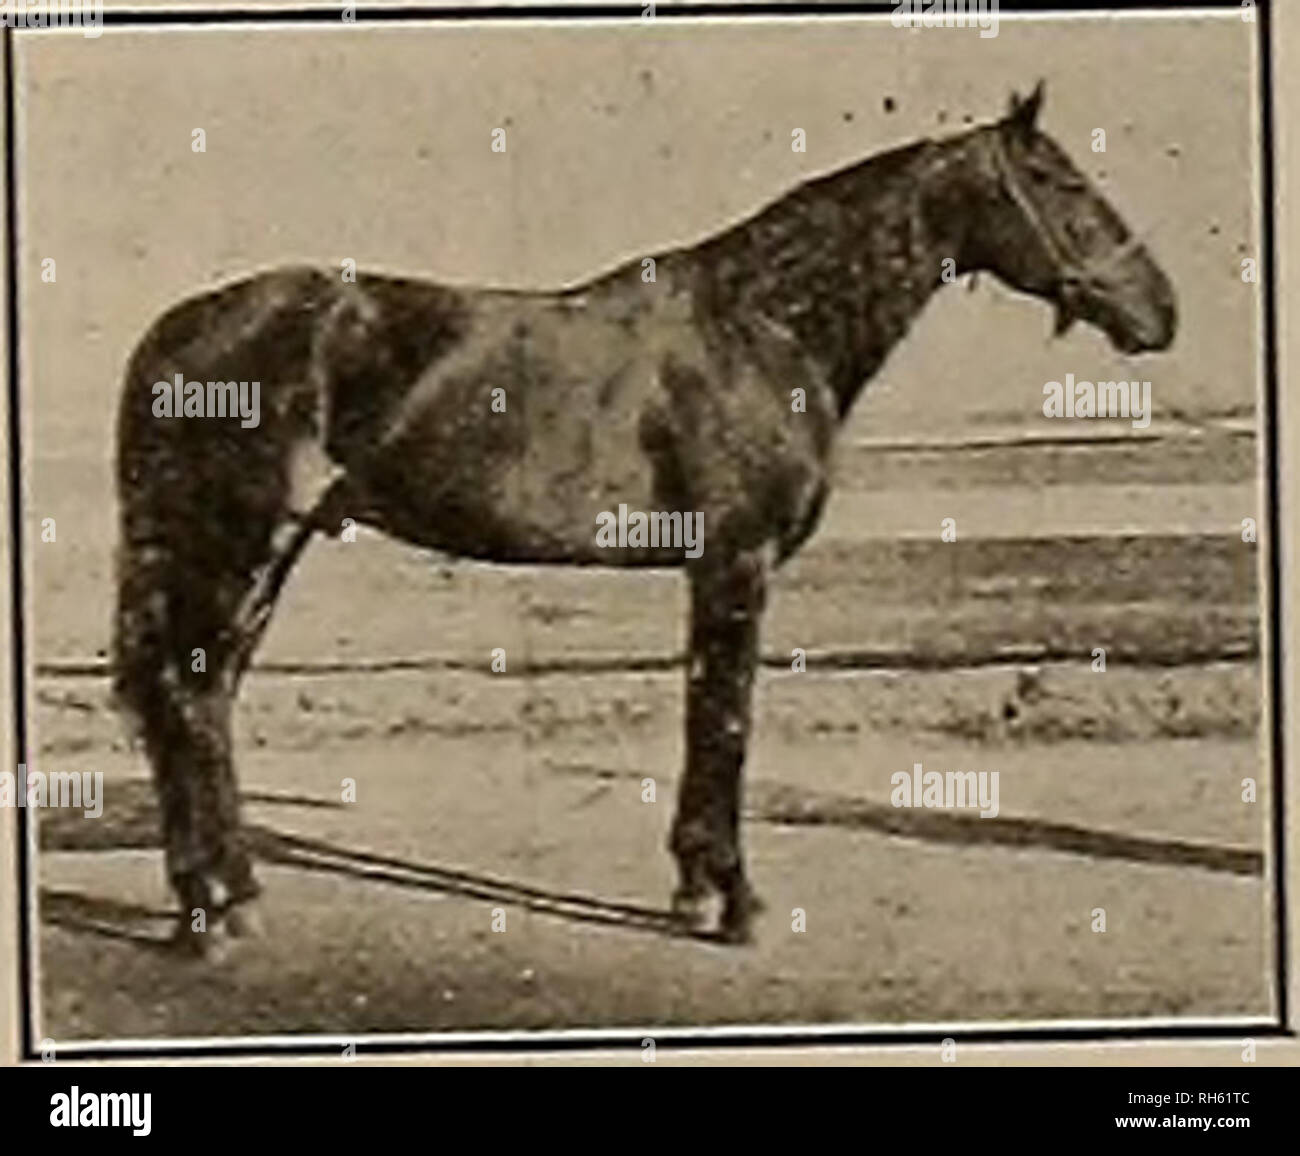 . Breeder and sportsman. Horses. LOUISE CARTER 3, 2:24 Dam of mibur Loa (3) 2:1054 Mamll Alwln 2:12 Martin Carter (3i 2:29M Daughter of ChestnutTom 2:15 by Nutwood Wilkes 2:16% Sired by KINNEY LOU 2:07 3- Sire of Wilbur Lou 2:10'-.t True Kinney (2) 2:19 21 Standard Performers Son of McKinney 2:11% and Mary Lou 2:17 WORLD'S CHAMPION YEARLING TROTTING STALLION 1910 Unbeaten Two-Year-Old In 1911 S&amp;gKW.*S2S ffSMW. 5HS £=*^ Also holder of the World's Record of a Five-Heat Race by a 3-yr.-old Stallion Limited number of approved mares at $100 the season. ia/11 our l ou was bred to seven (7) mare Stock Photo